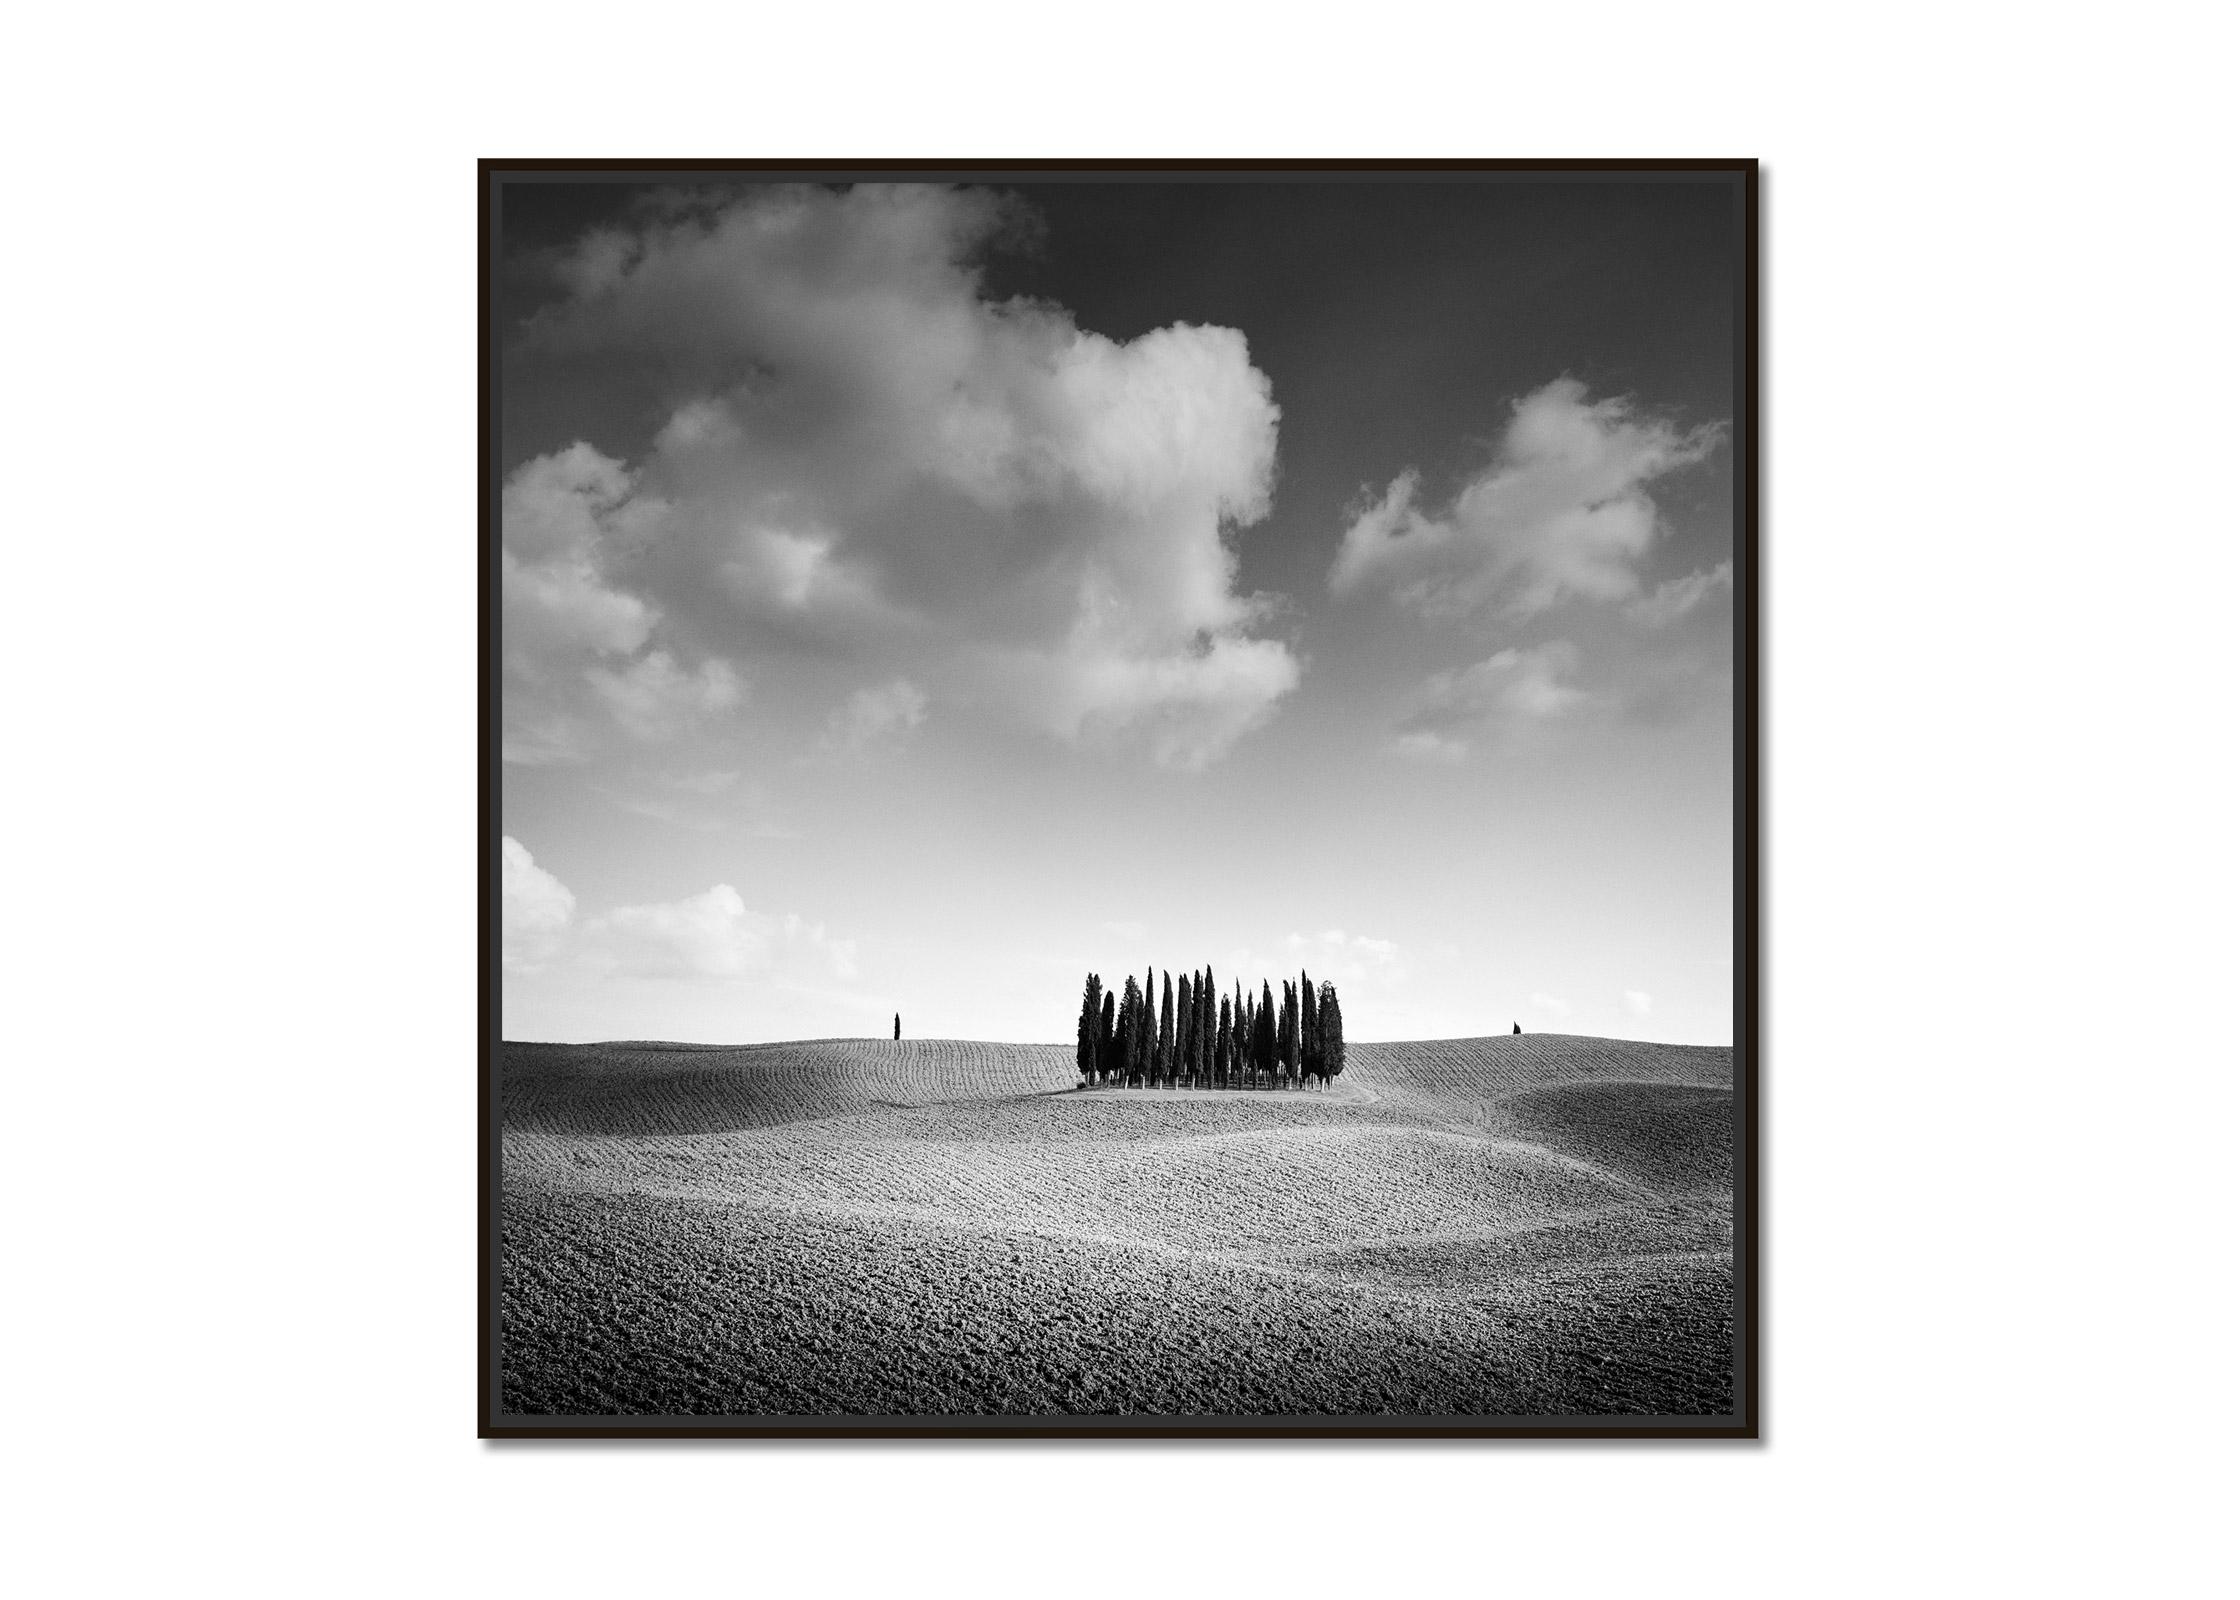   Cypress Hill, Tuscany, Italy, minimalist black and white photograhy, landscape - Photograph by Gerald Berghammer